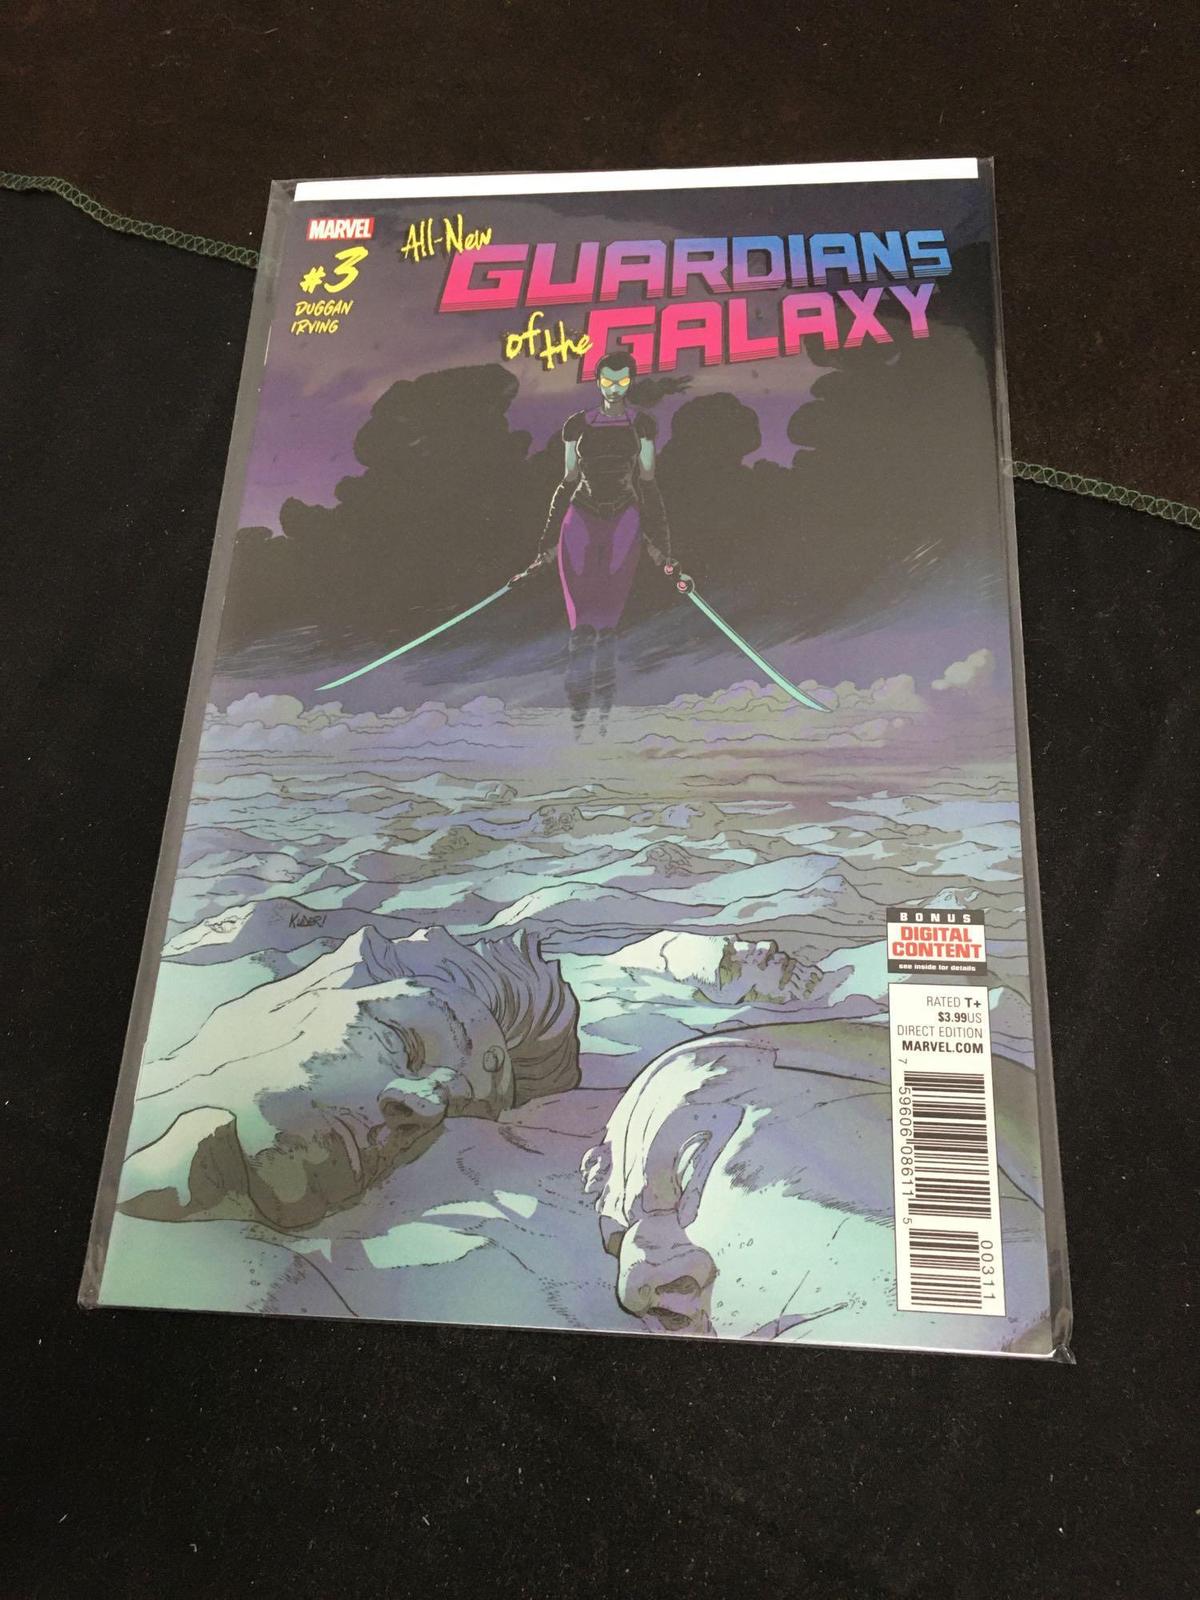 All New Guardians of The Galaxy #3 Comic Book from Amazing Collection